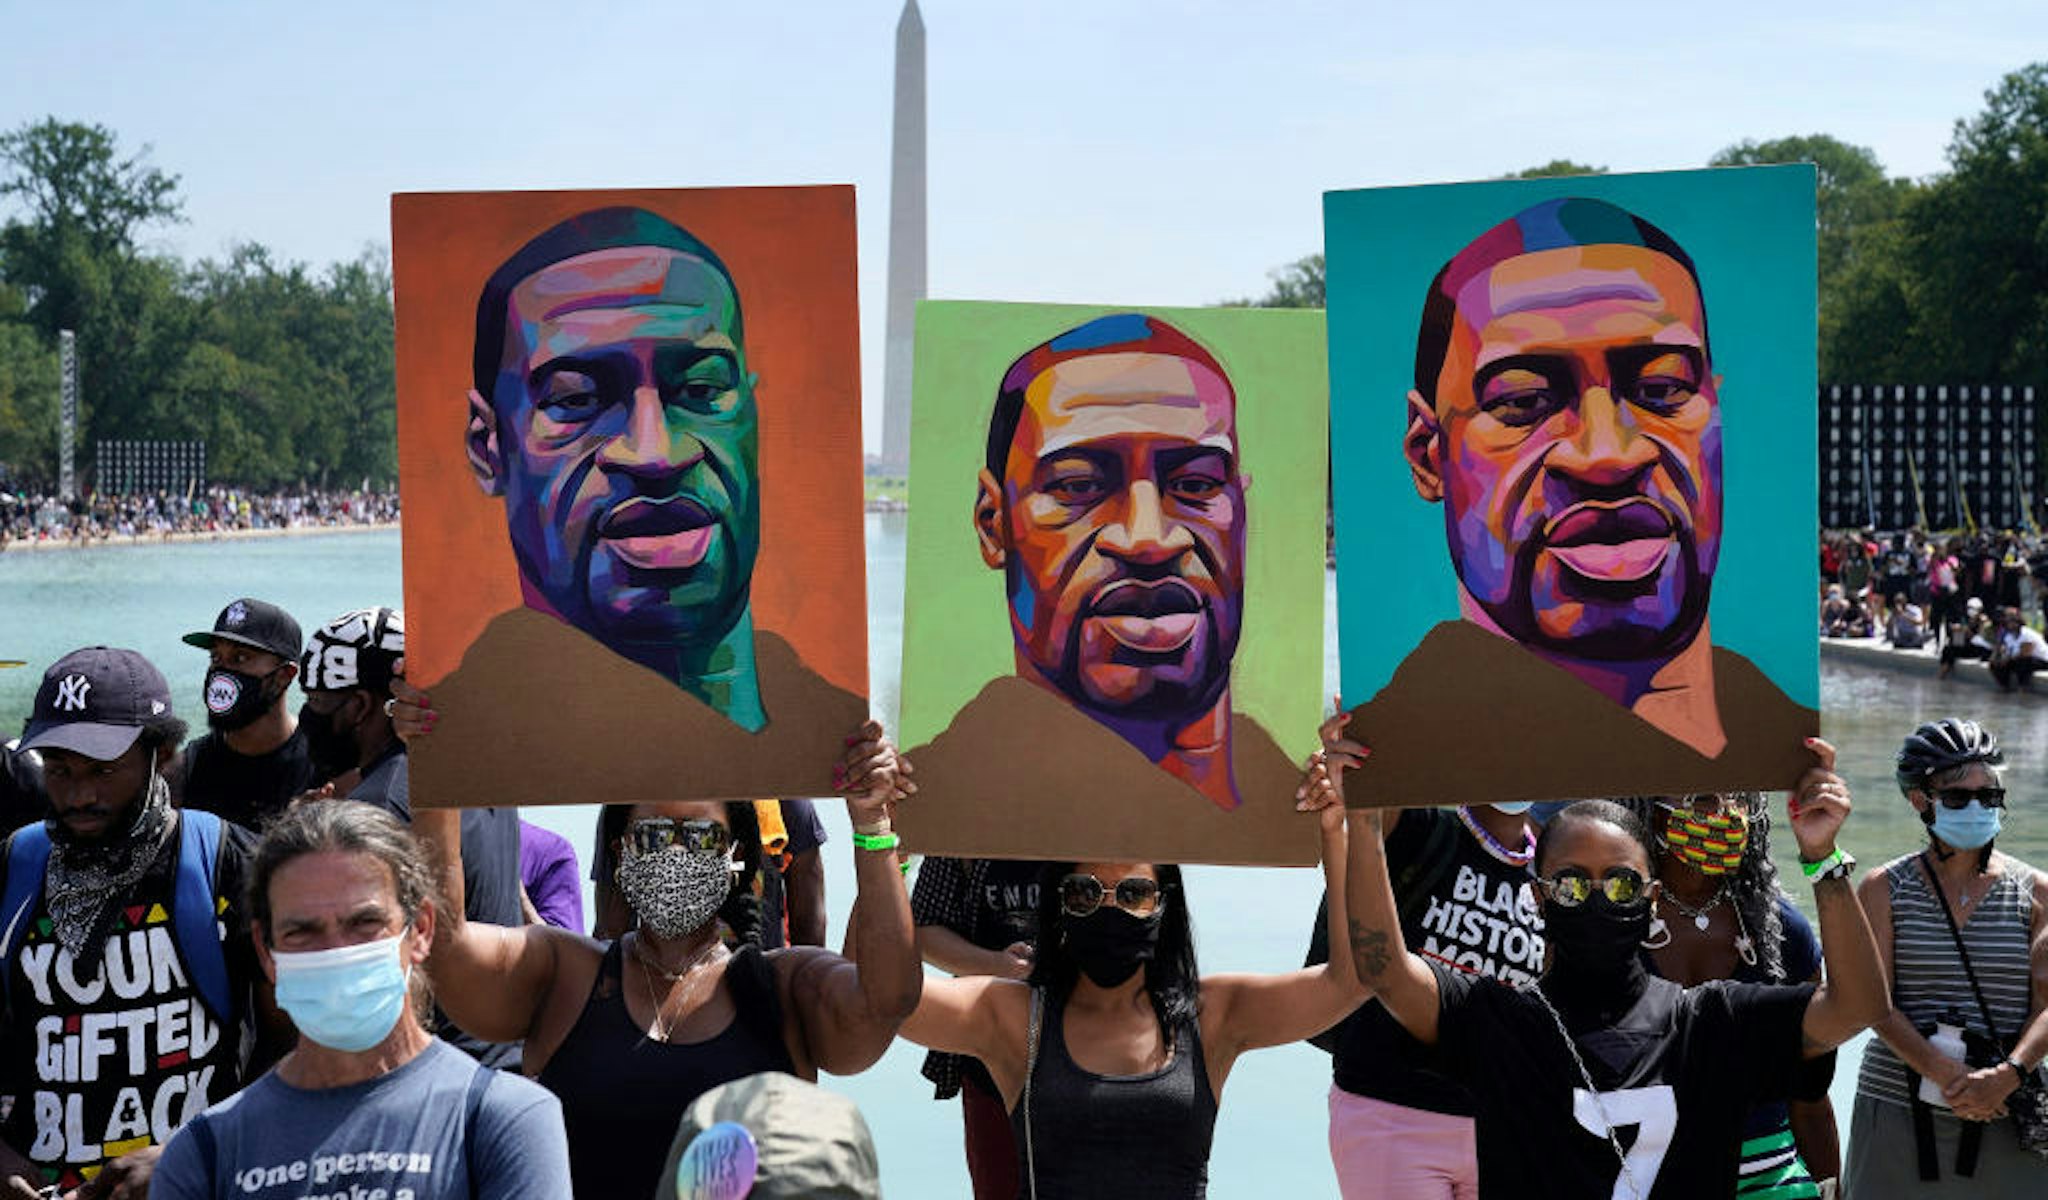 WASHINGTON, DC - AUGUST 28: Attendees hold images of George Floyd as they participate in the March on Washington at the Lincoln Memorial August 28, 2020 in Washington, DC. Today marks the 57th anniversary of Rev. Martin Luther King Jr.'s "I Have A Dream" speech at the same location. (Photo by Drew Angerer/Getty Images)